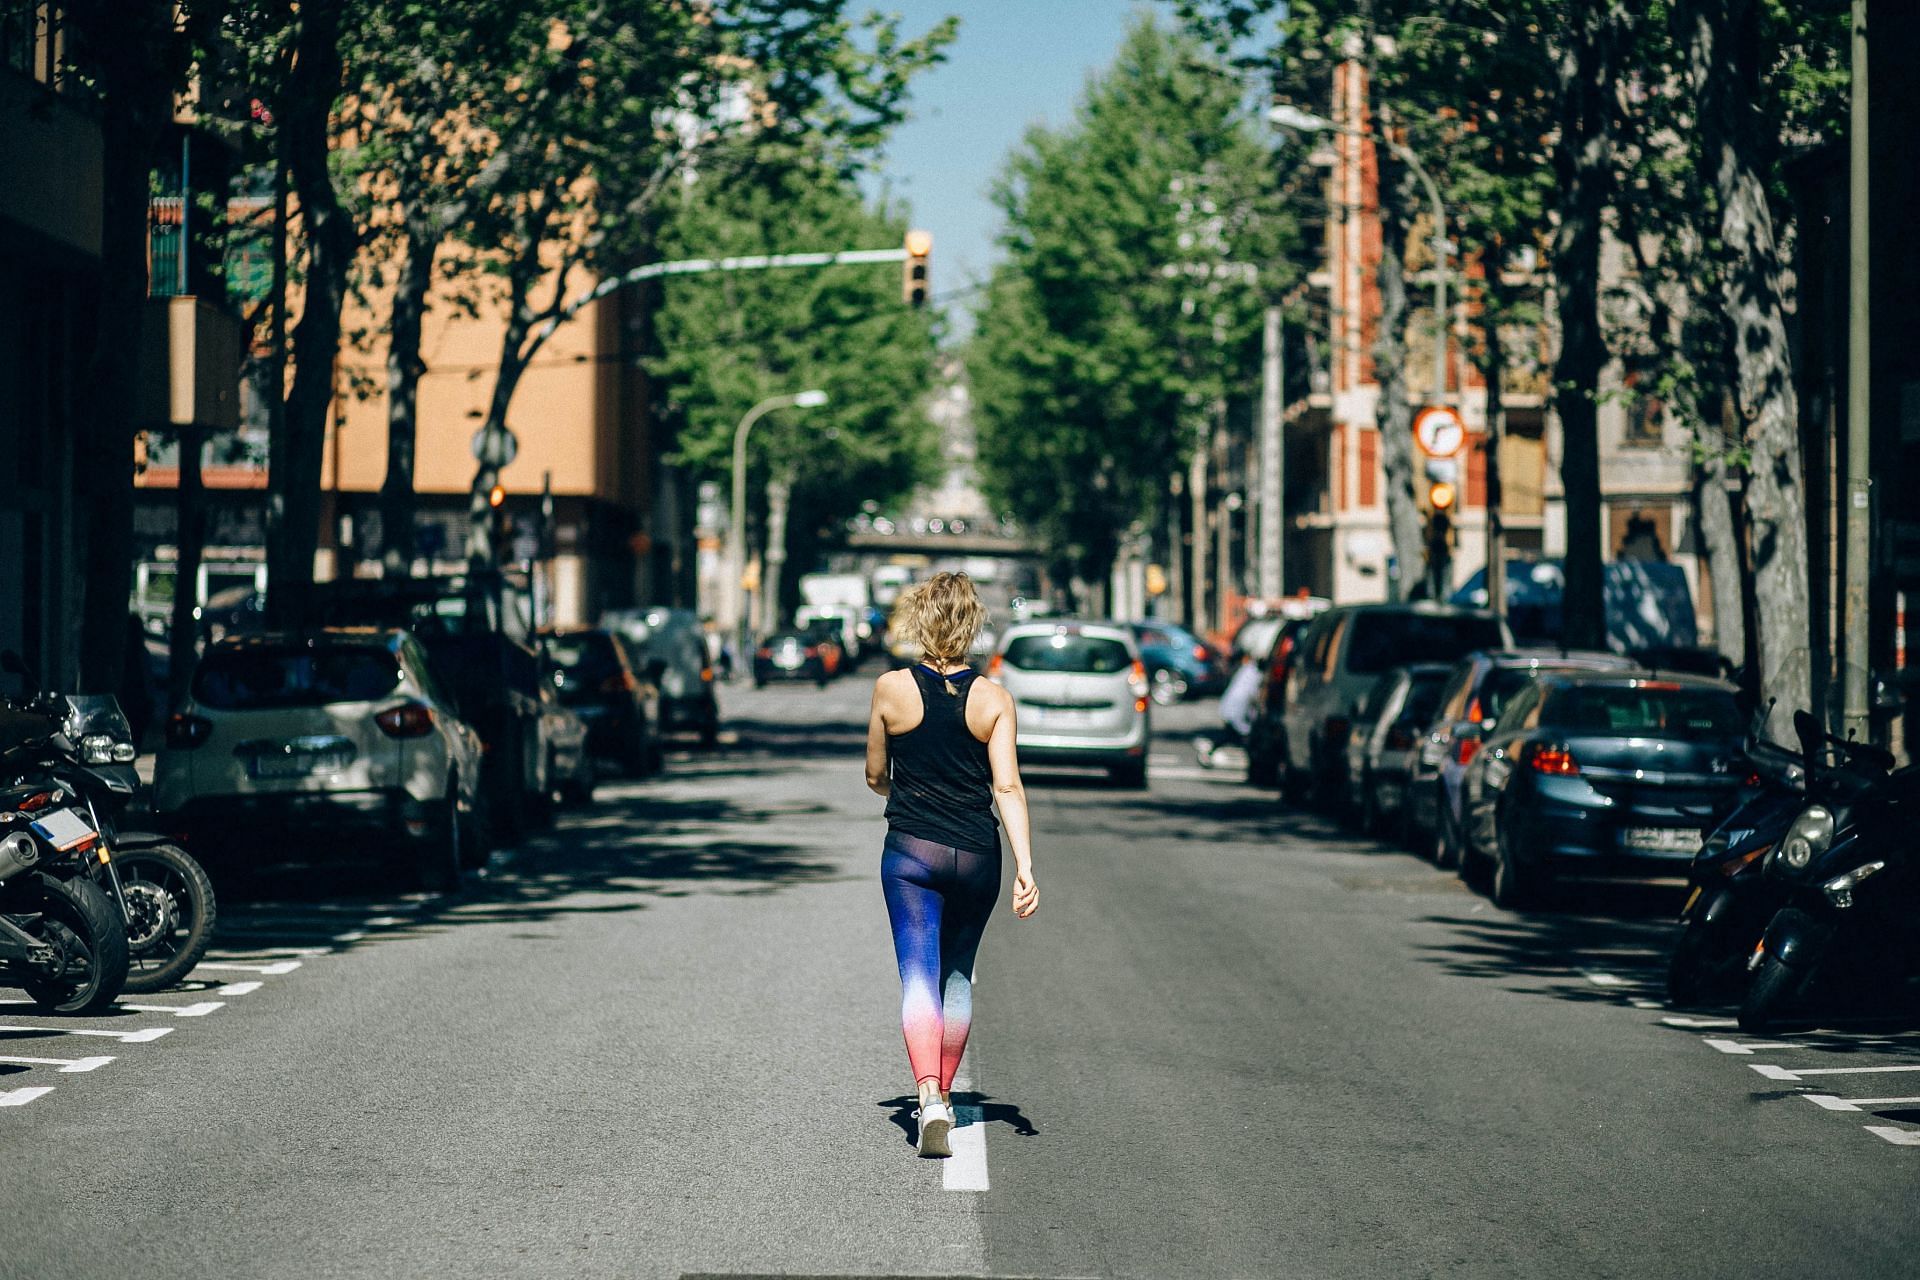 Regular exercise is essential to for overall health and well-being. (Image via Pexels / Nataliya Vaitkevich)